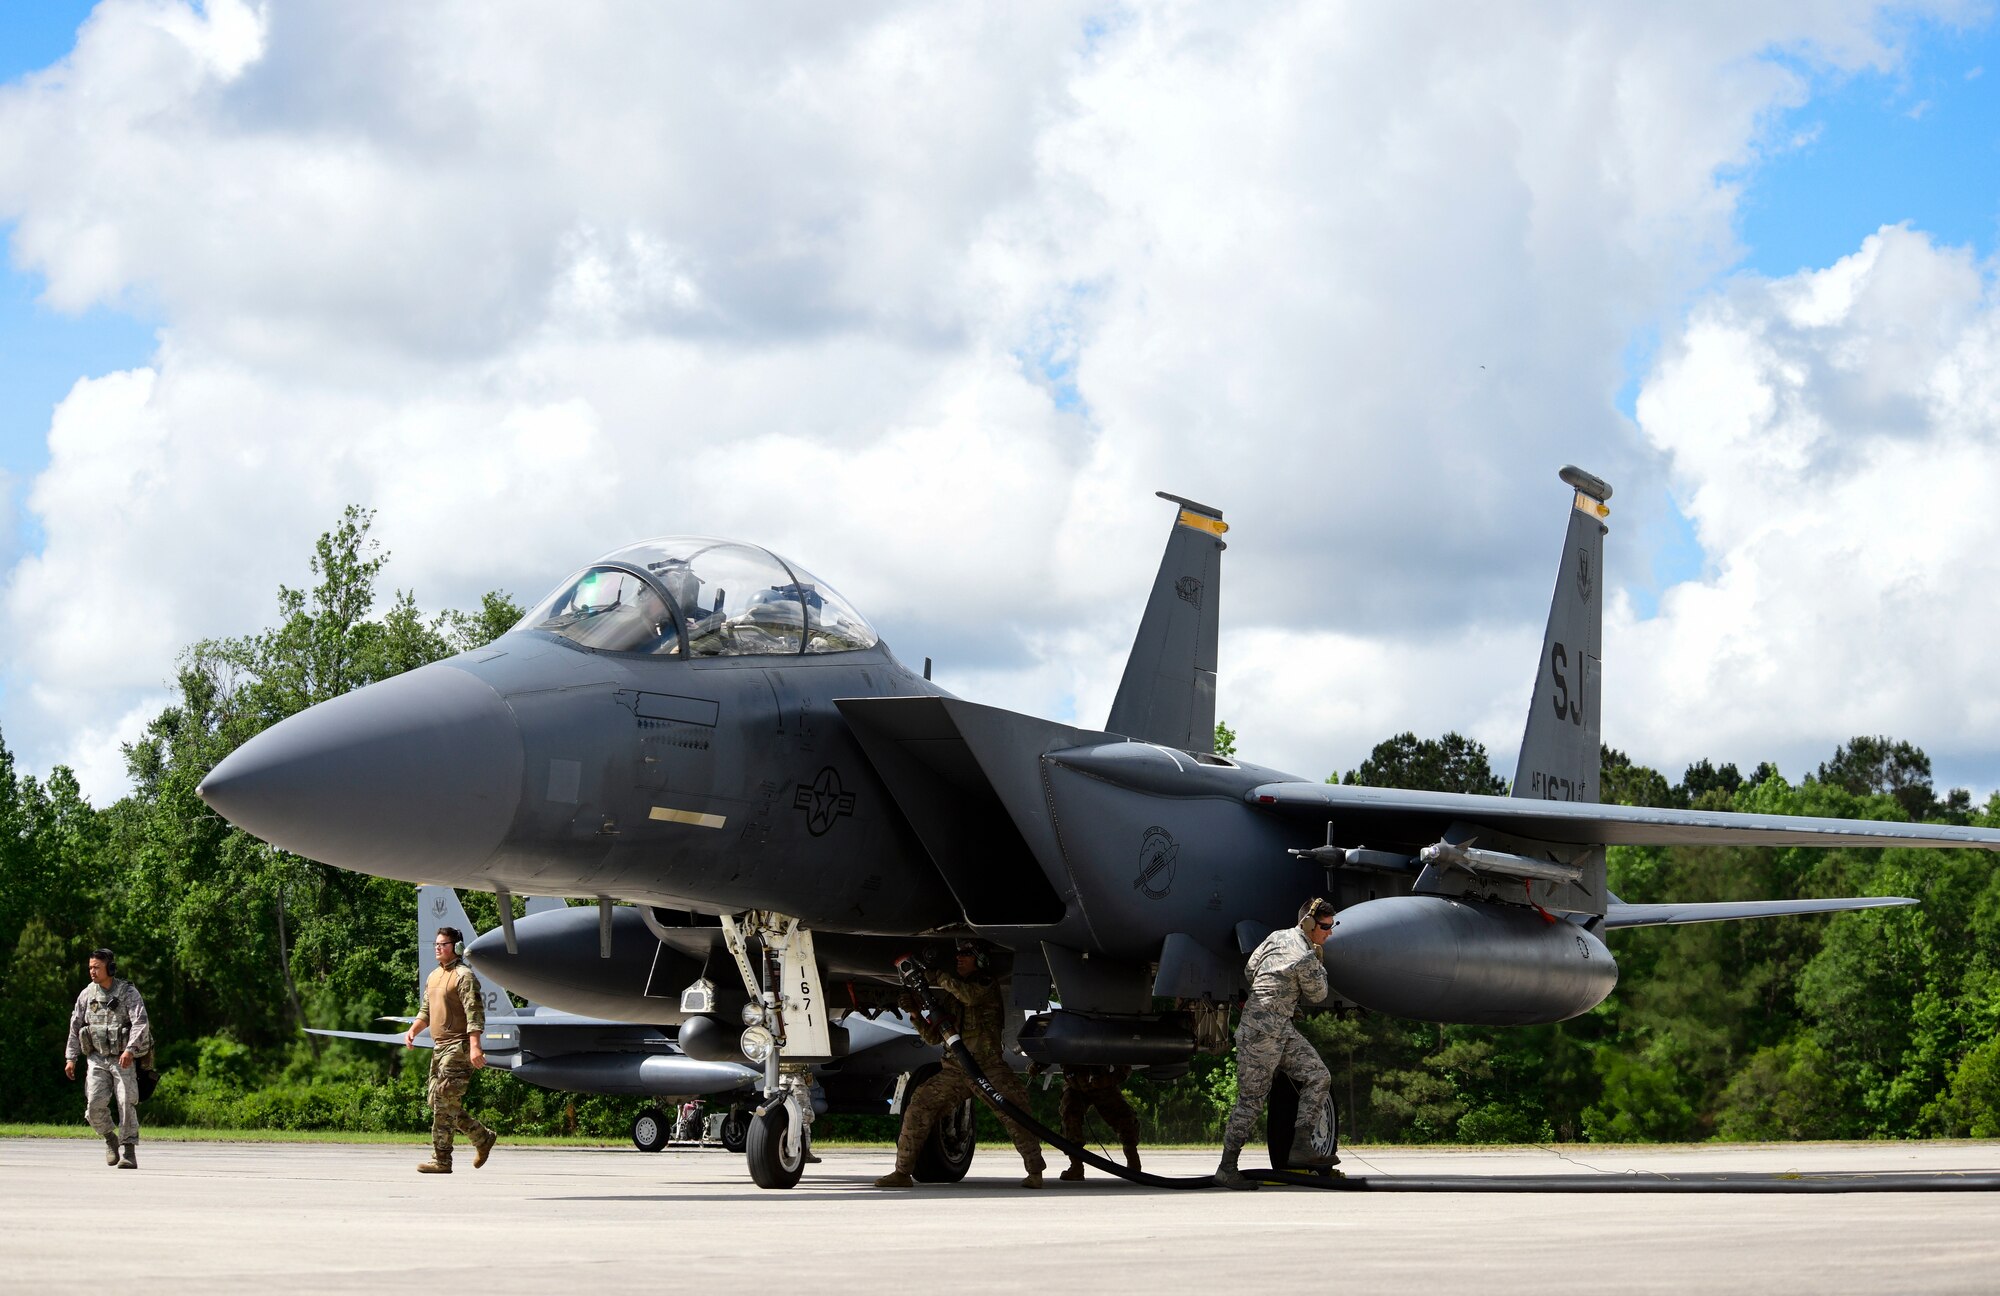 Airmen from multiple Air Force specialty codes perform a hot-pit refuel on an F-15 E Strike Eagle during the Combat Support Wing capstone, May 9, 2019, at Kinston Regional Jetport, North Carolina. A hot-pit is a term used to describe a jet being refueled on the ground while the engines are running. (U.S. Air Force photo by Senior Airman Kenneth Boyton)